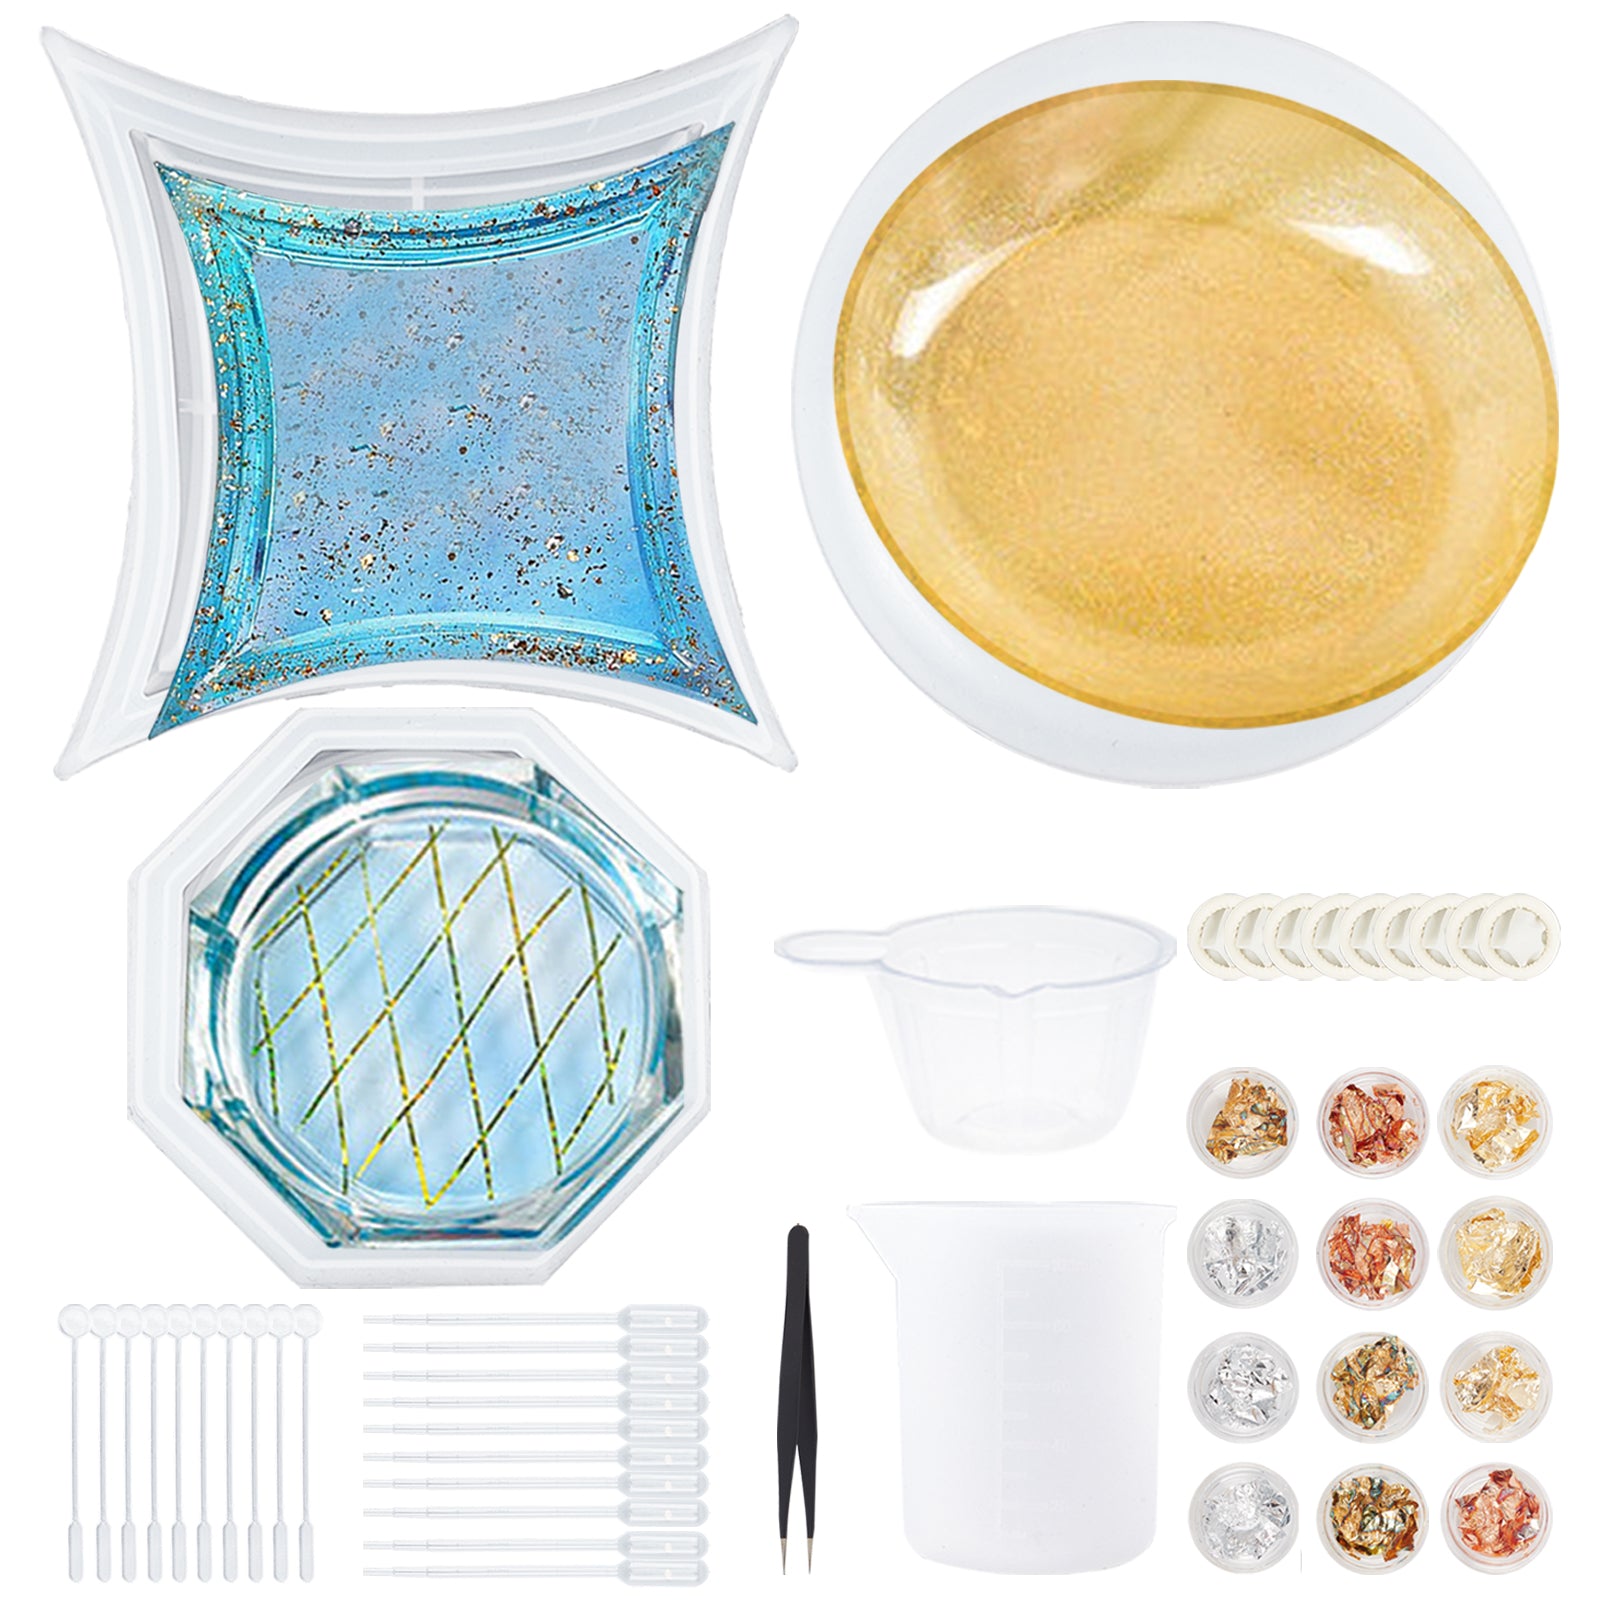 CRASPIRE DIY Cup Mat Resin Casting Silicone Molds Kits, with Foil